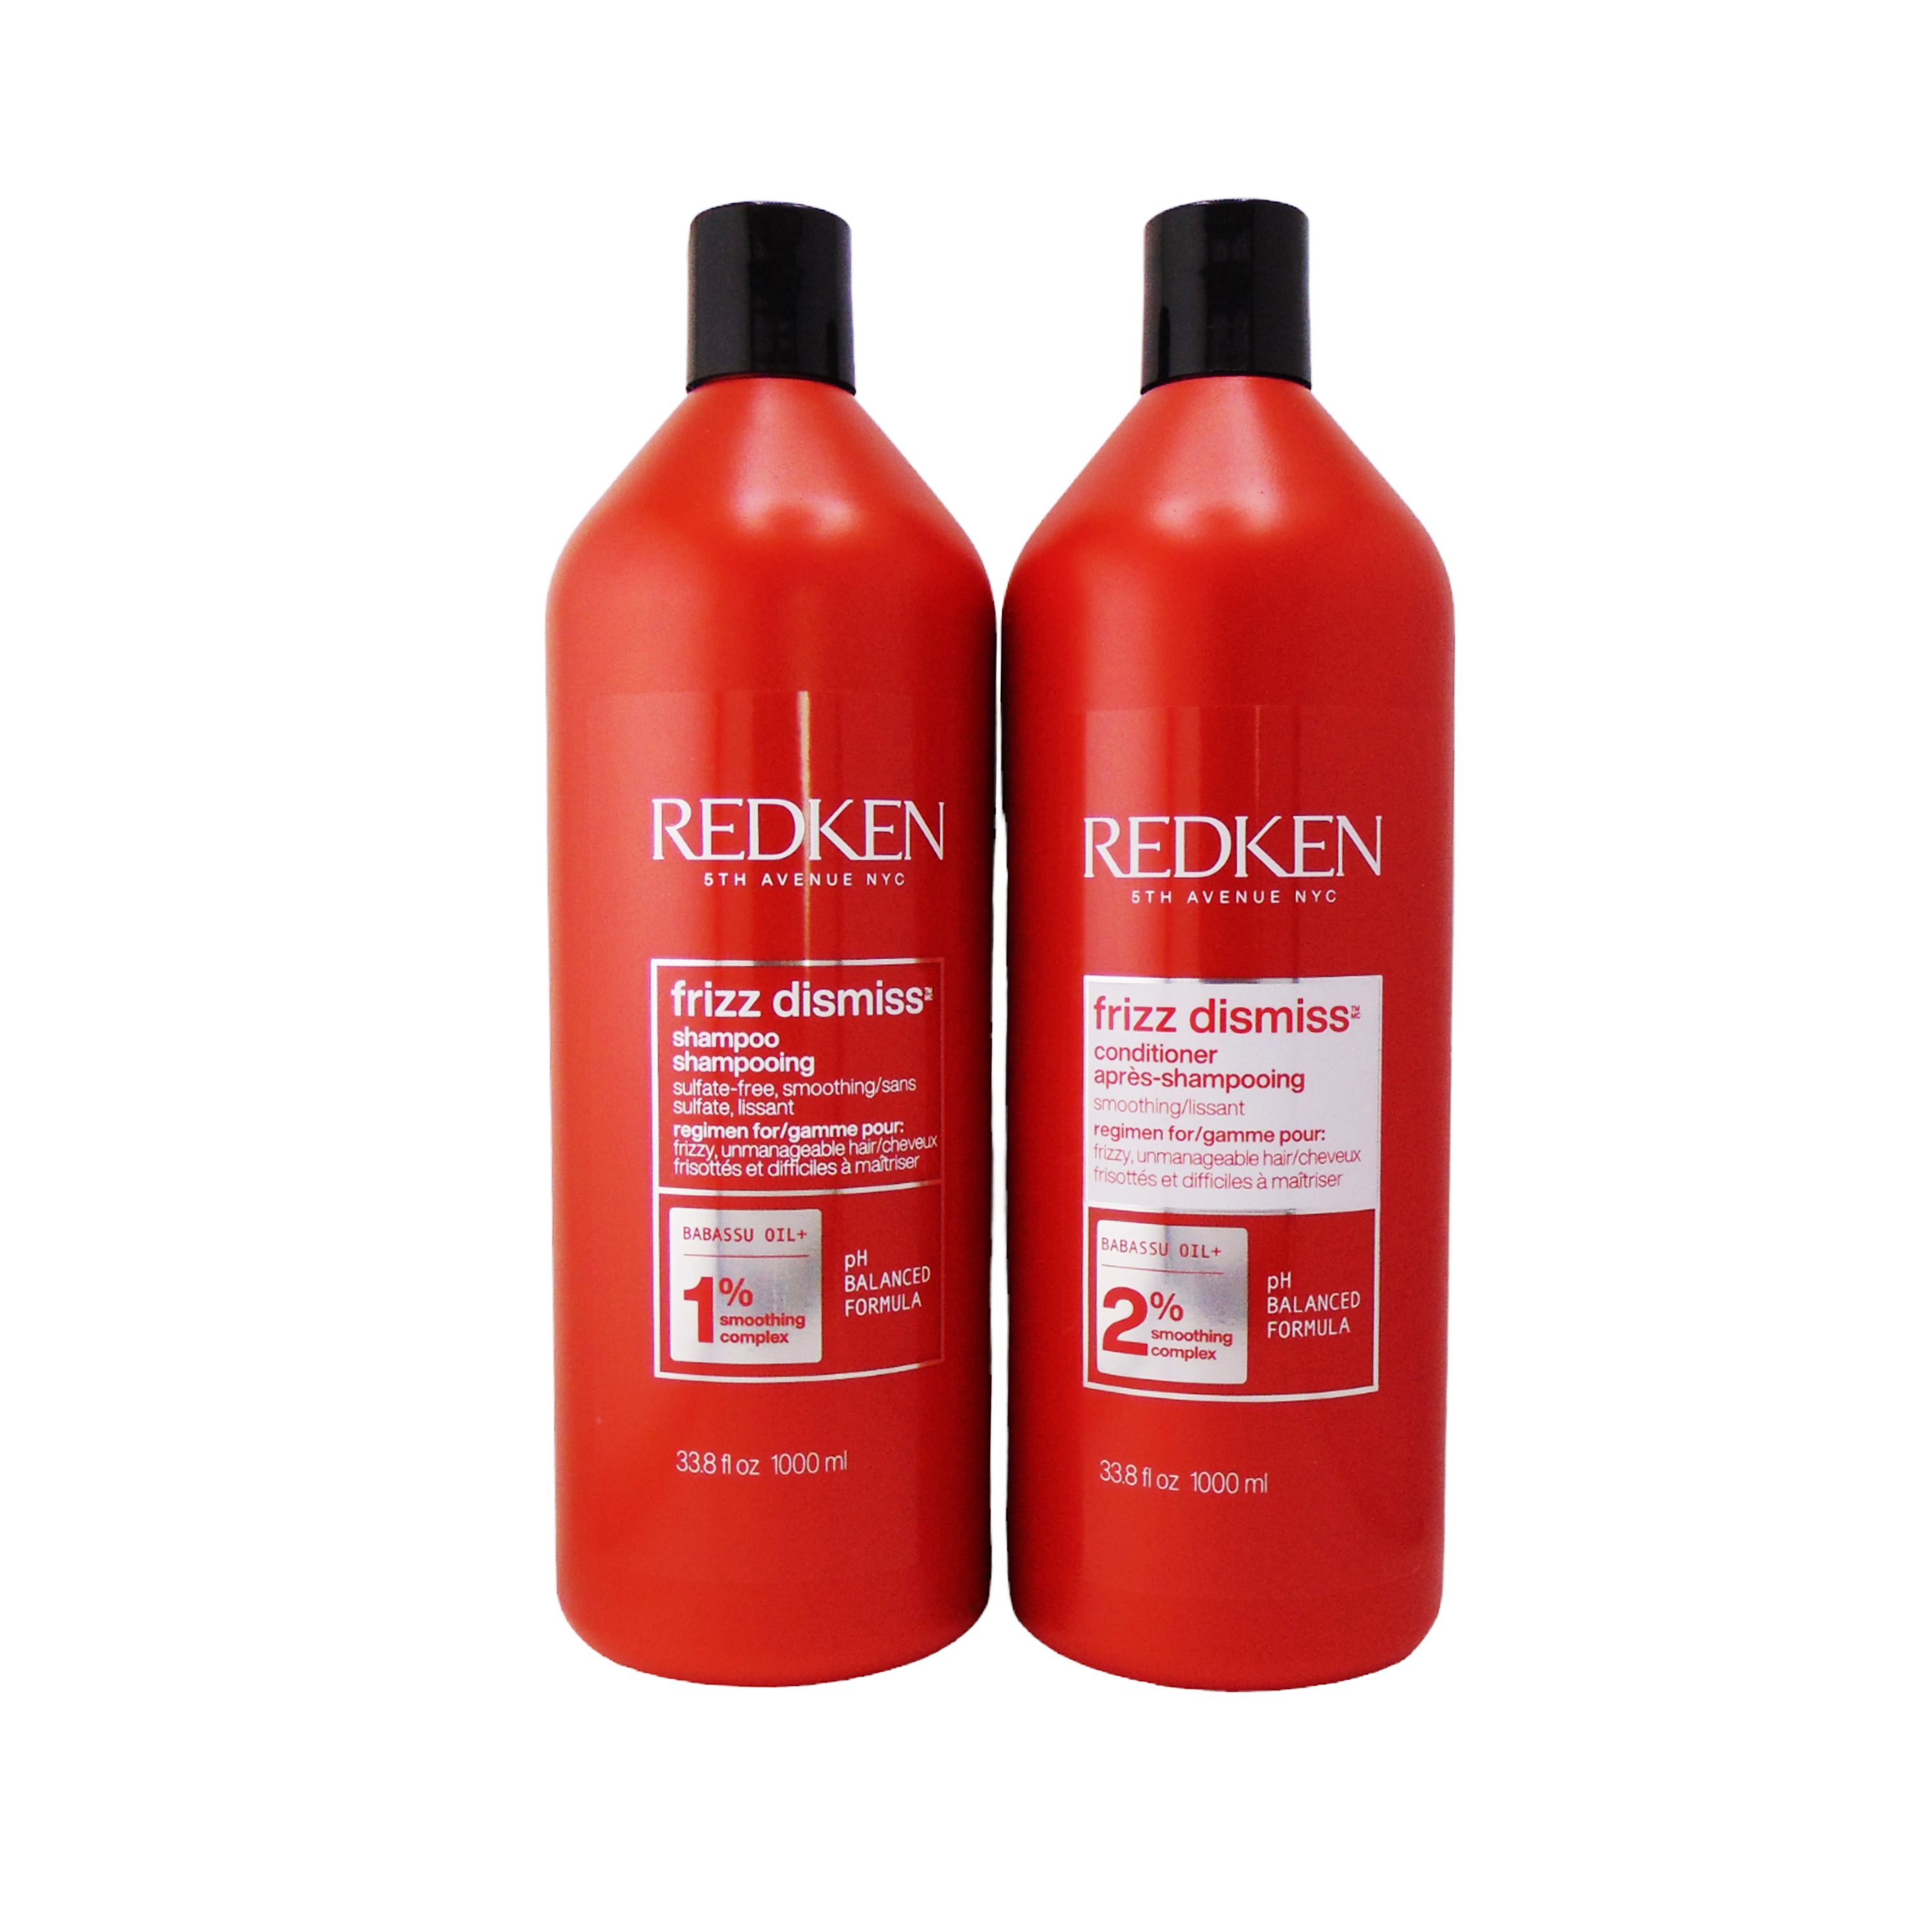 Redken Frizz Dismiss Duo (Shampoo and Conditioner)